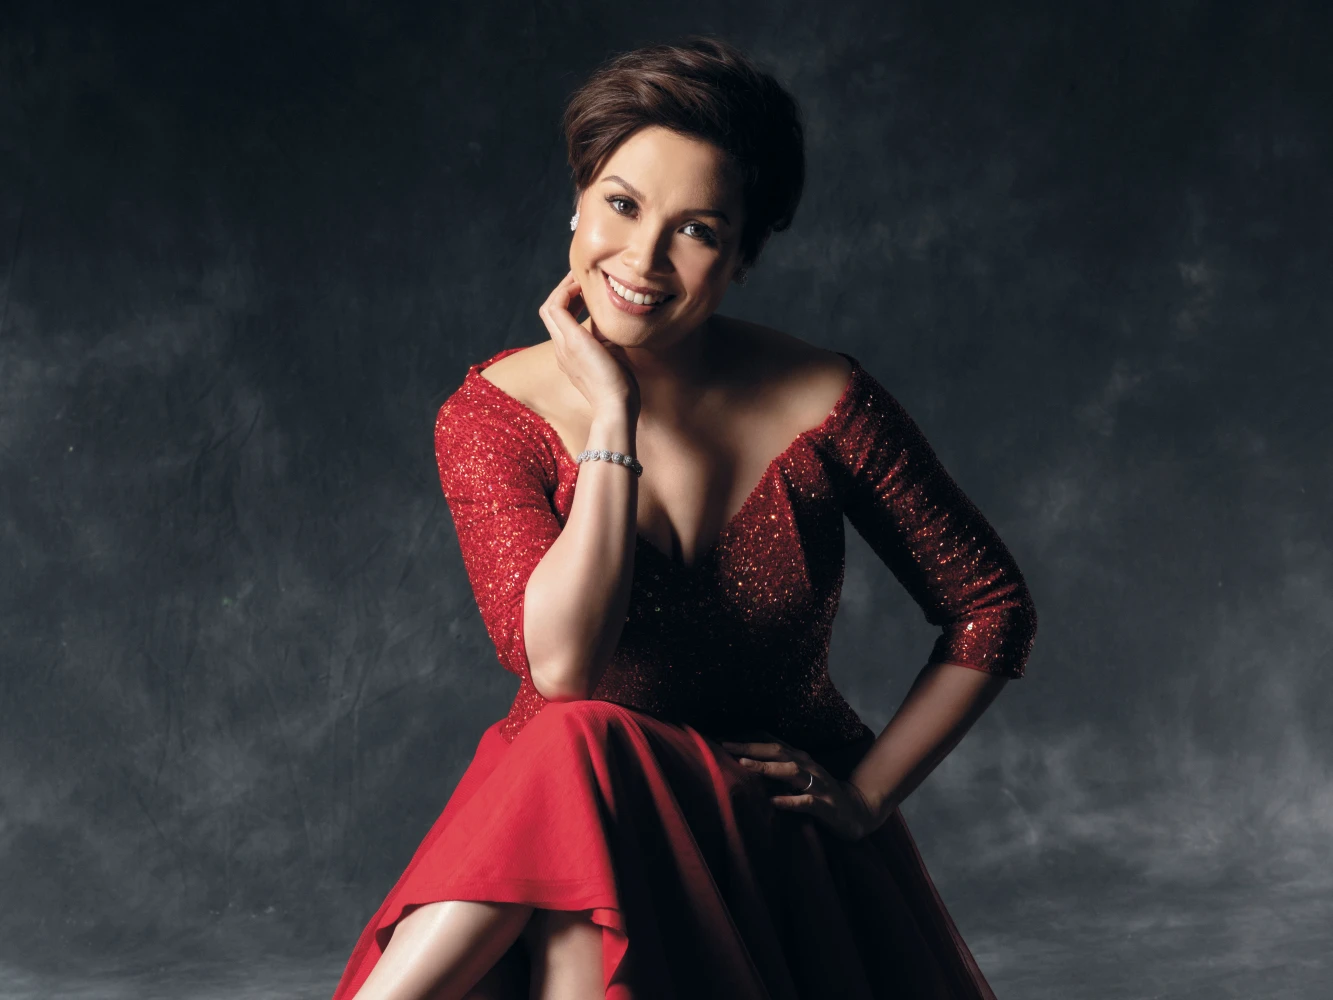 Signature Theatre and Wolf Trap Present Broadway in the Park featuring Megan Hilty & Lea Salonga: What to expect - 3